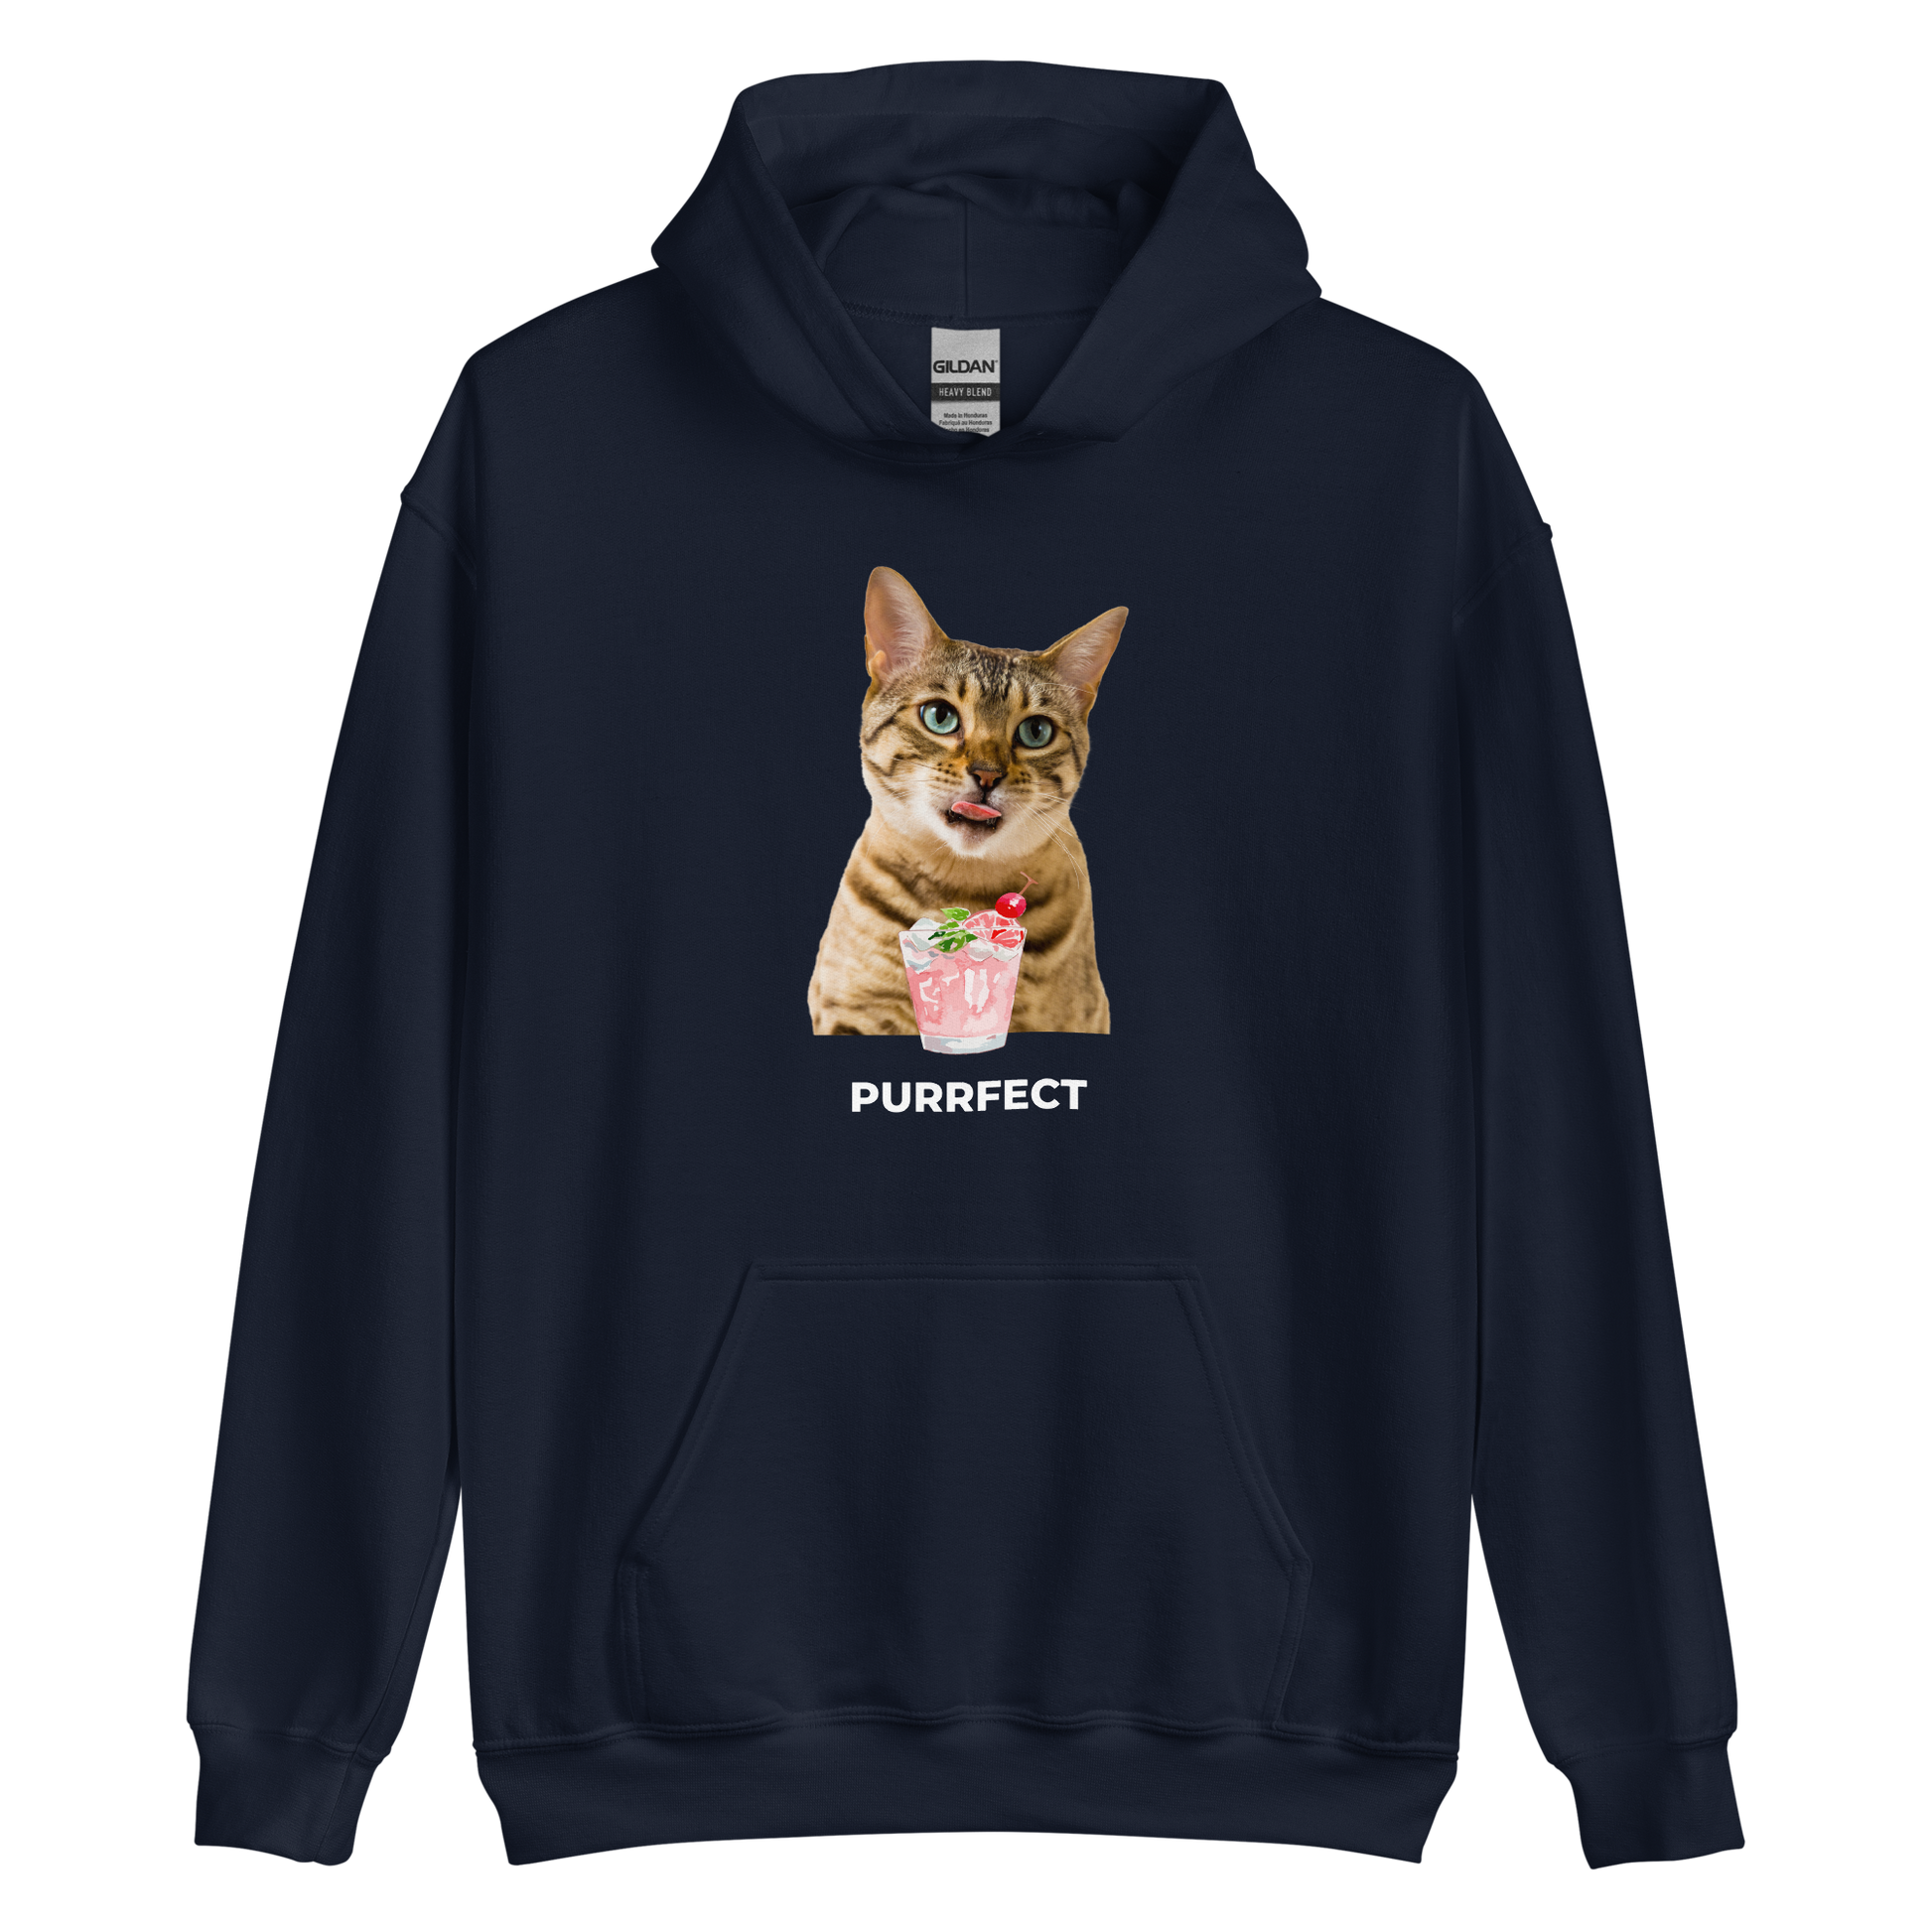 Navy Cat Hoodie featuring an adorable Purrfect graphic on the chest - Funny Graphic Cat Hoodies - Boozy Fox